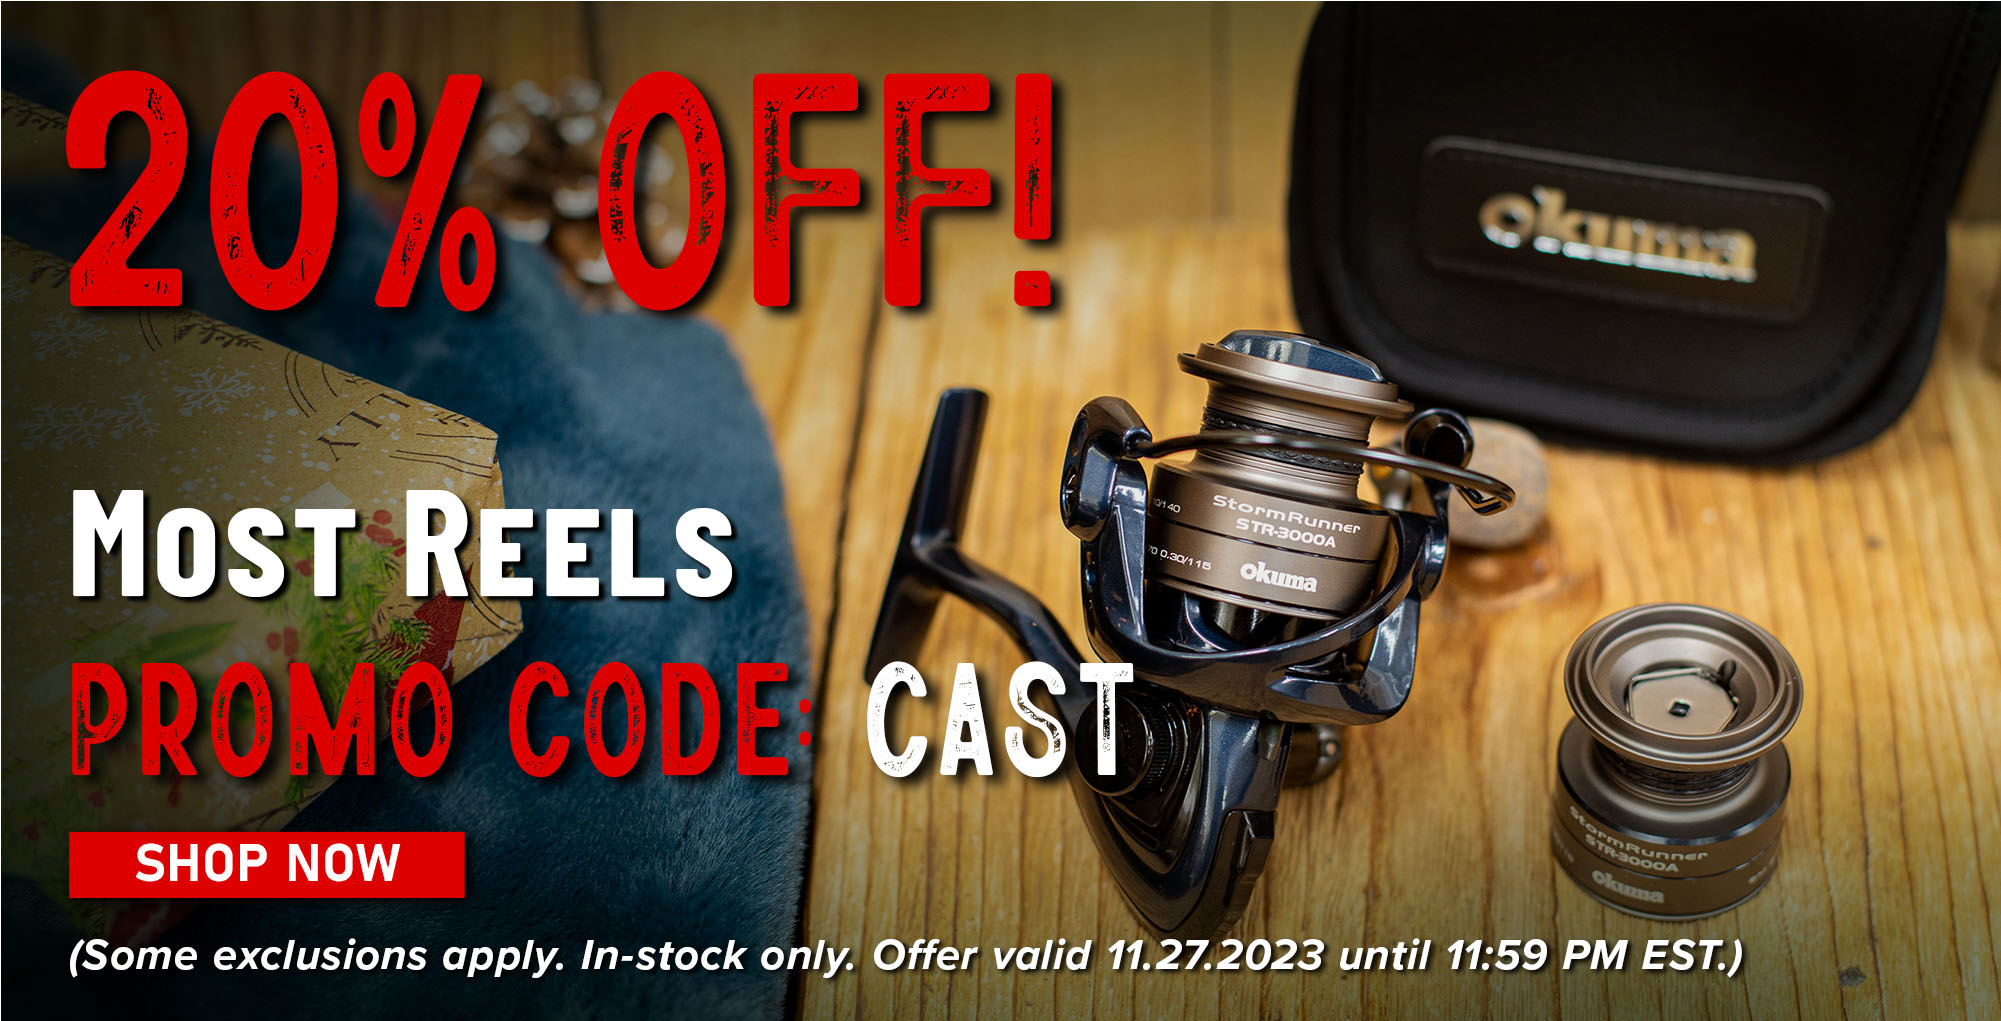 20% Off! Most Reels Promo Code: CAST Shop Now (Some exclusions apply. In-stock only. Offer valid 11.27.2023 until 11:59 PM EST.)